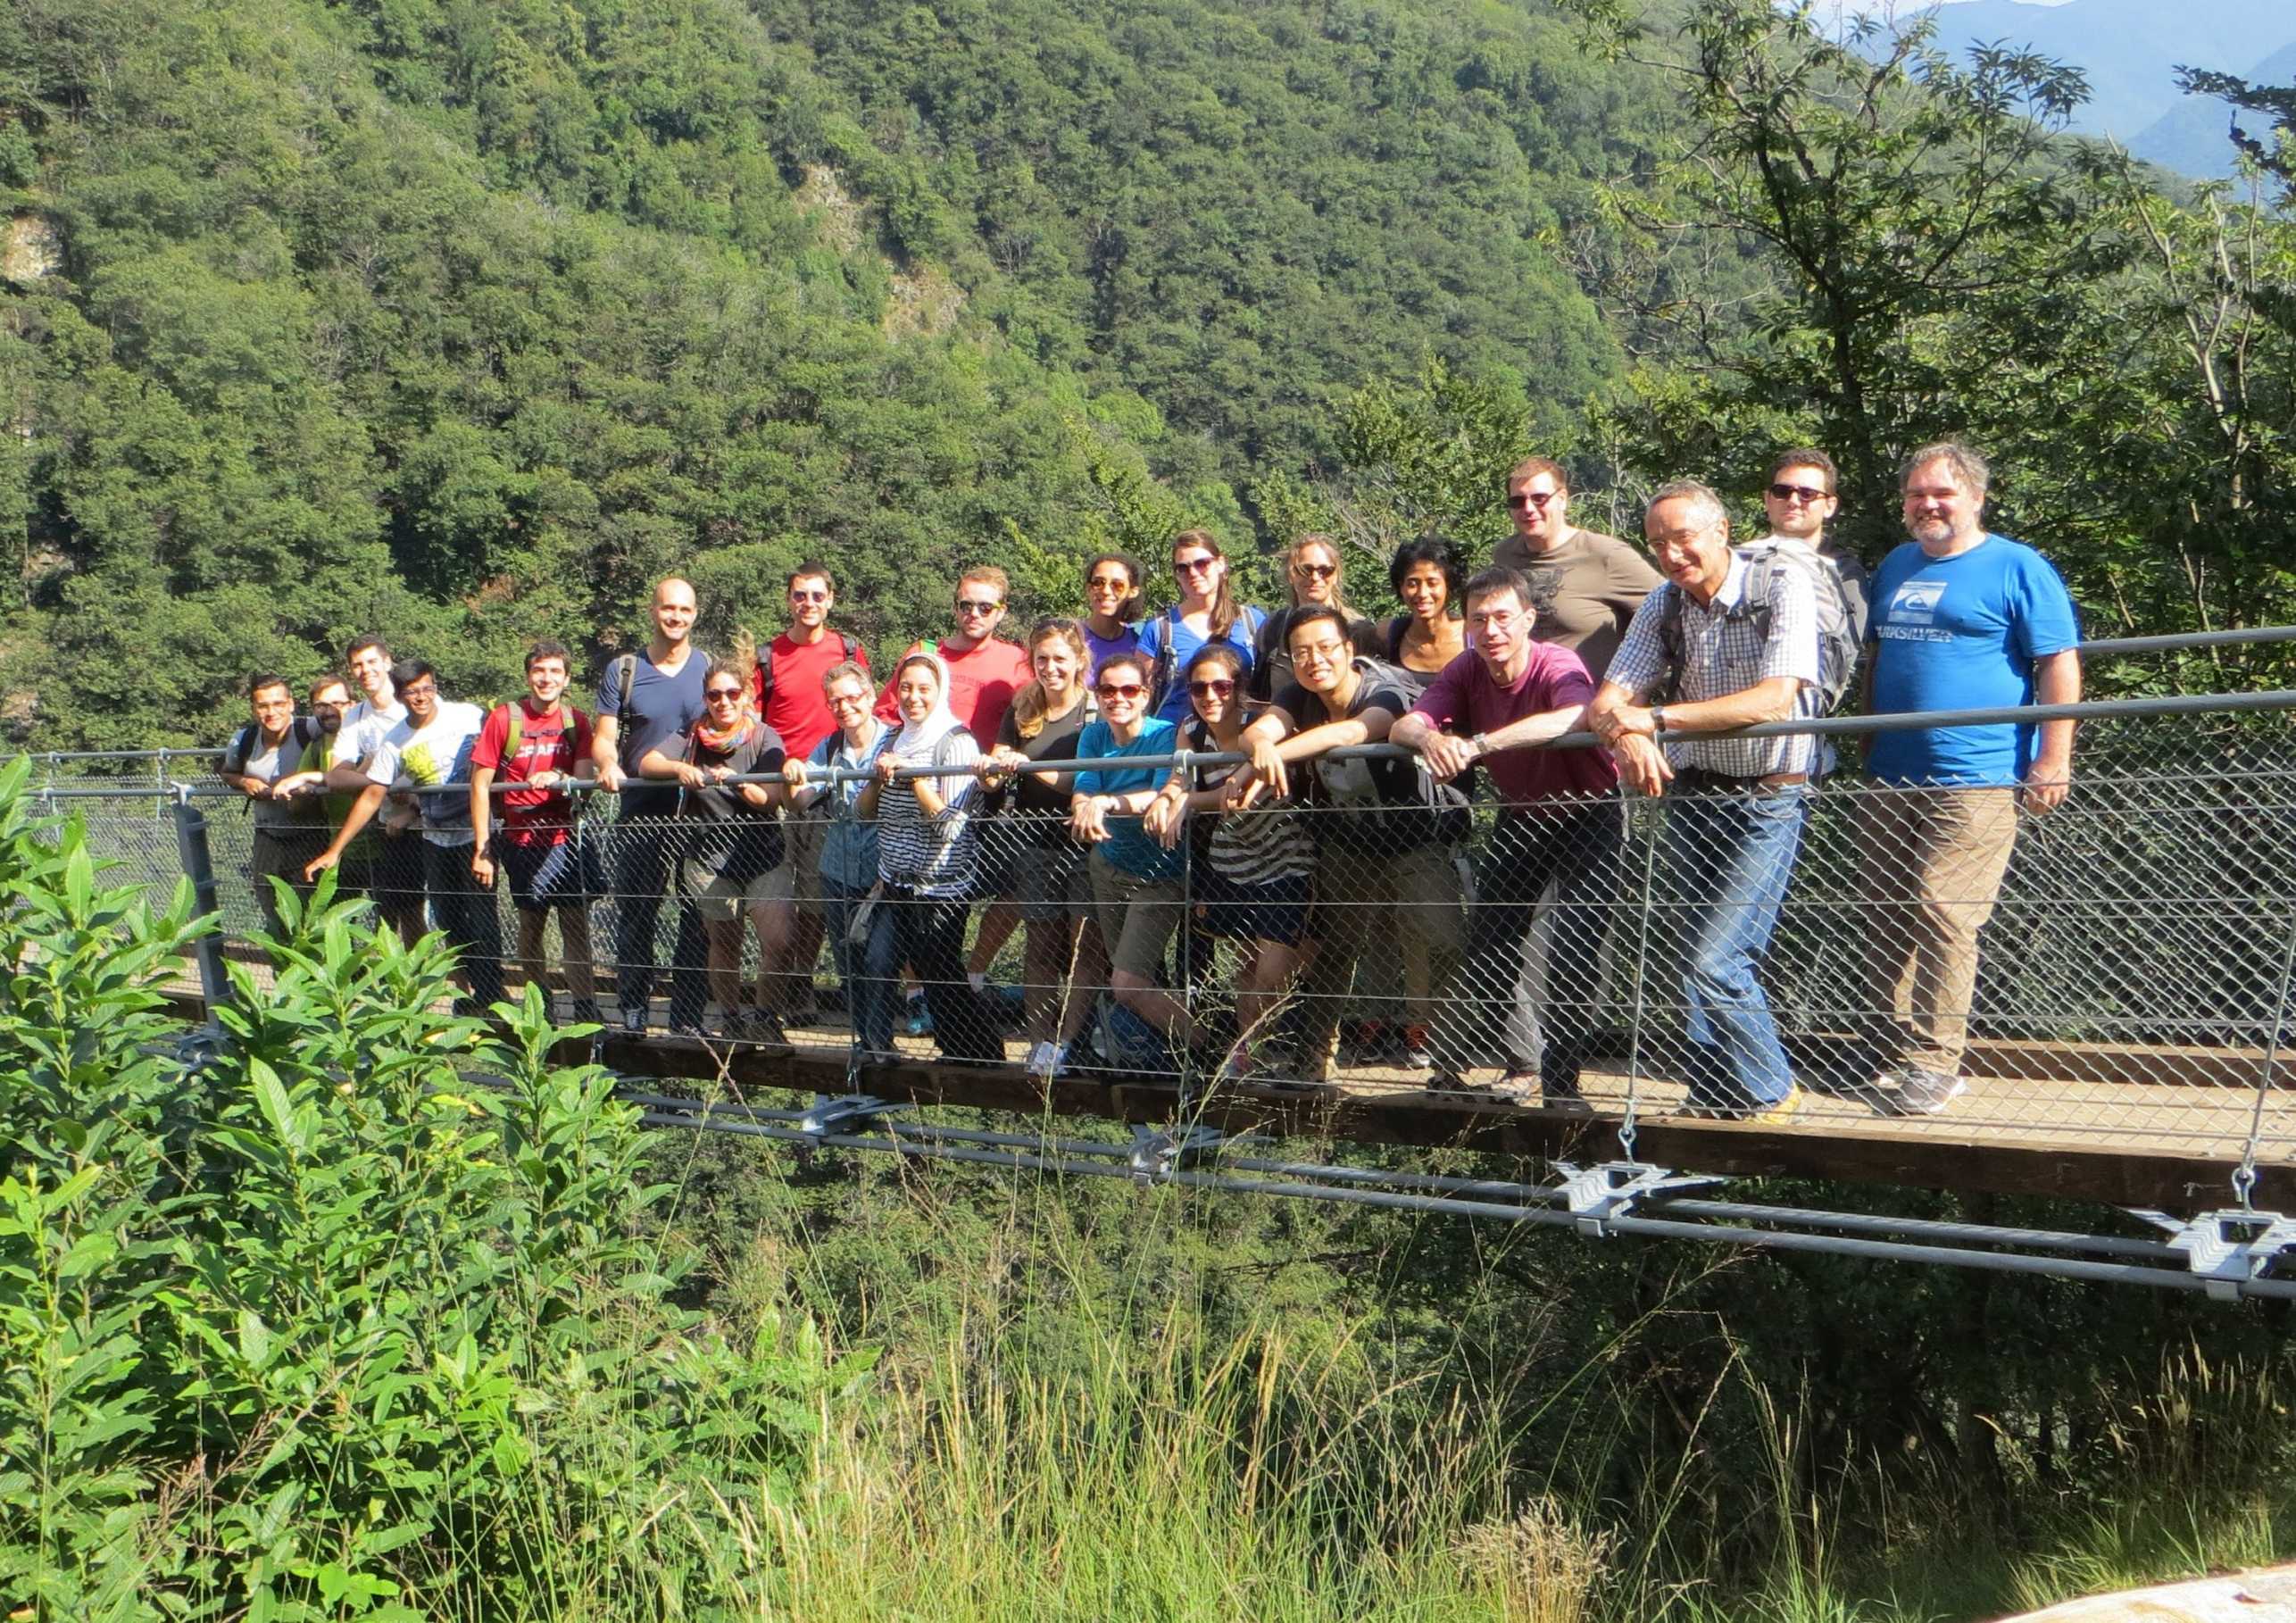 Enlarged view: SETG group in September 2015, Ticino